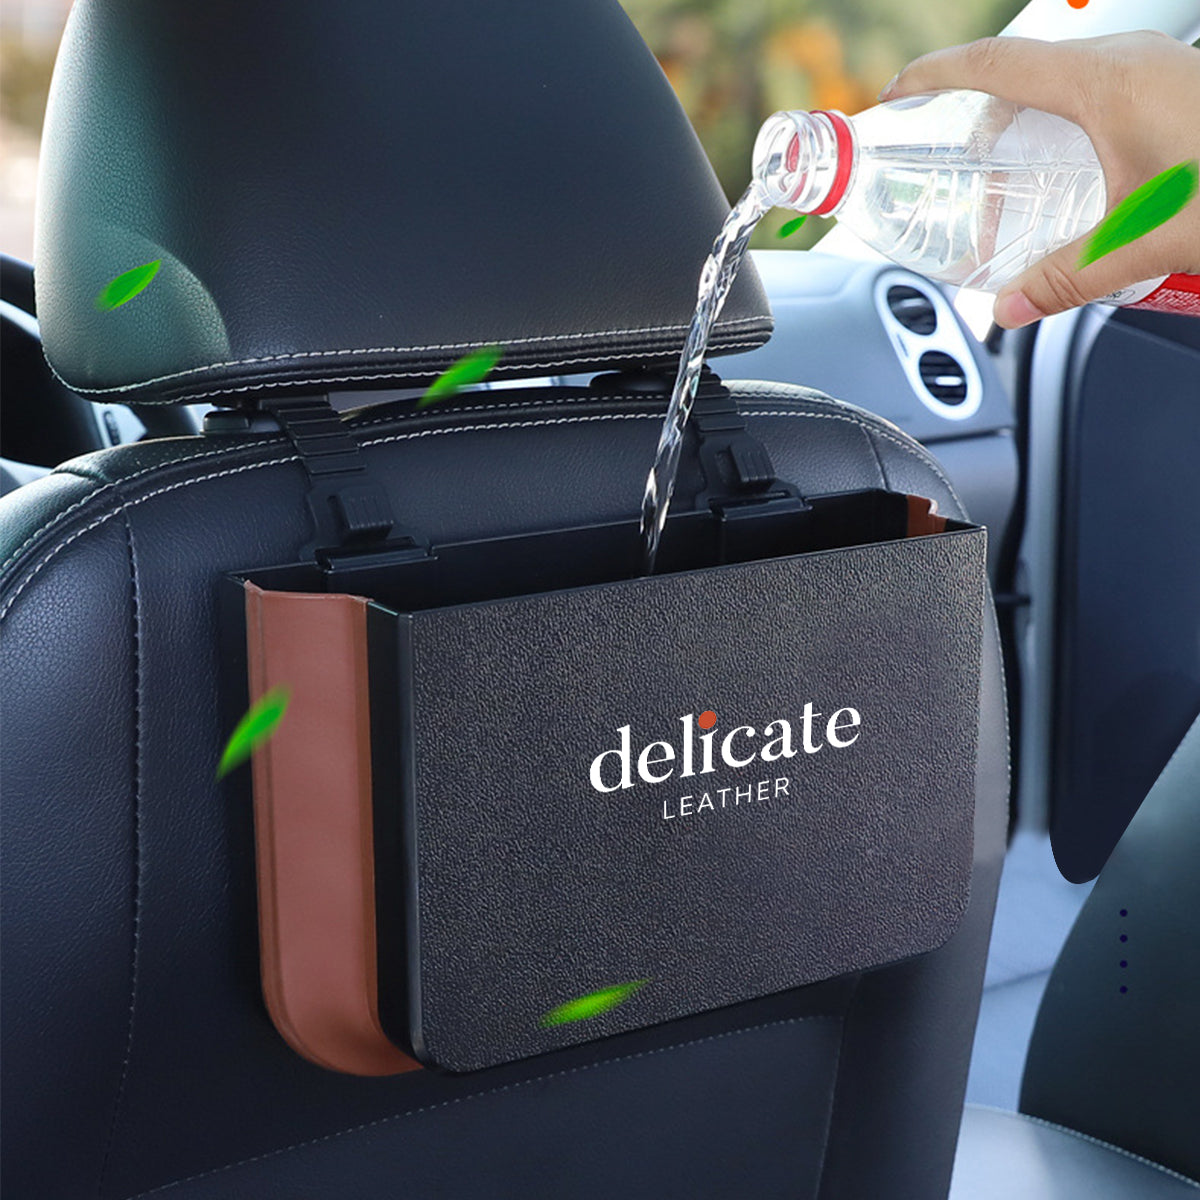 Delicate Leather Hanging Waterproof Car Trash can-Foldable, Custom For Your Cars, Waterproof, and Equipped with Cup Holders and Trays. Multi-Purpose, Car Accessories WQ11992